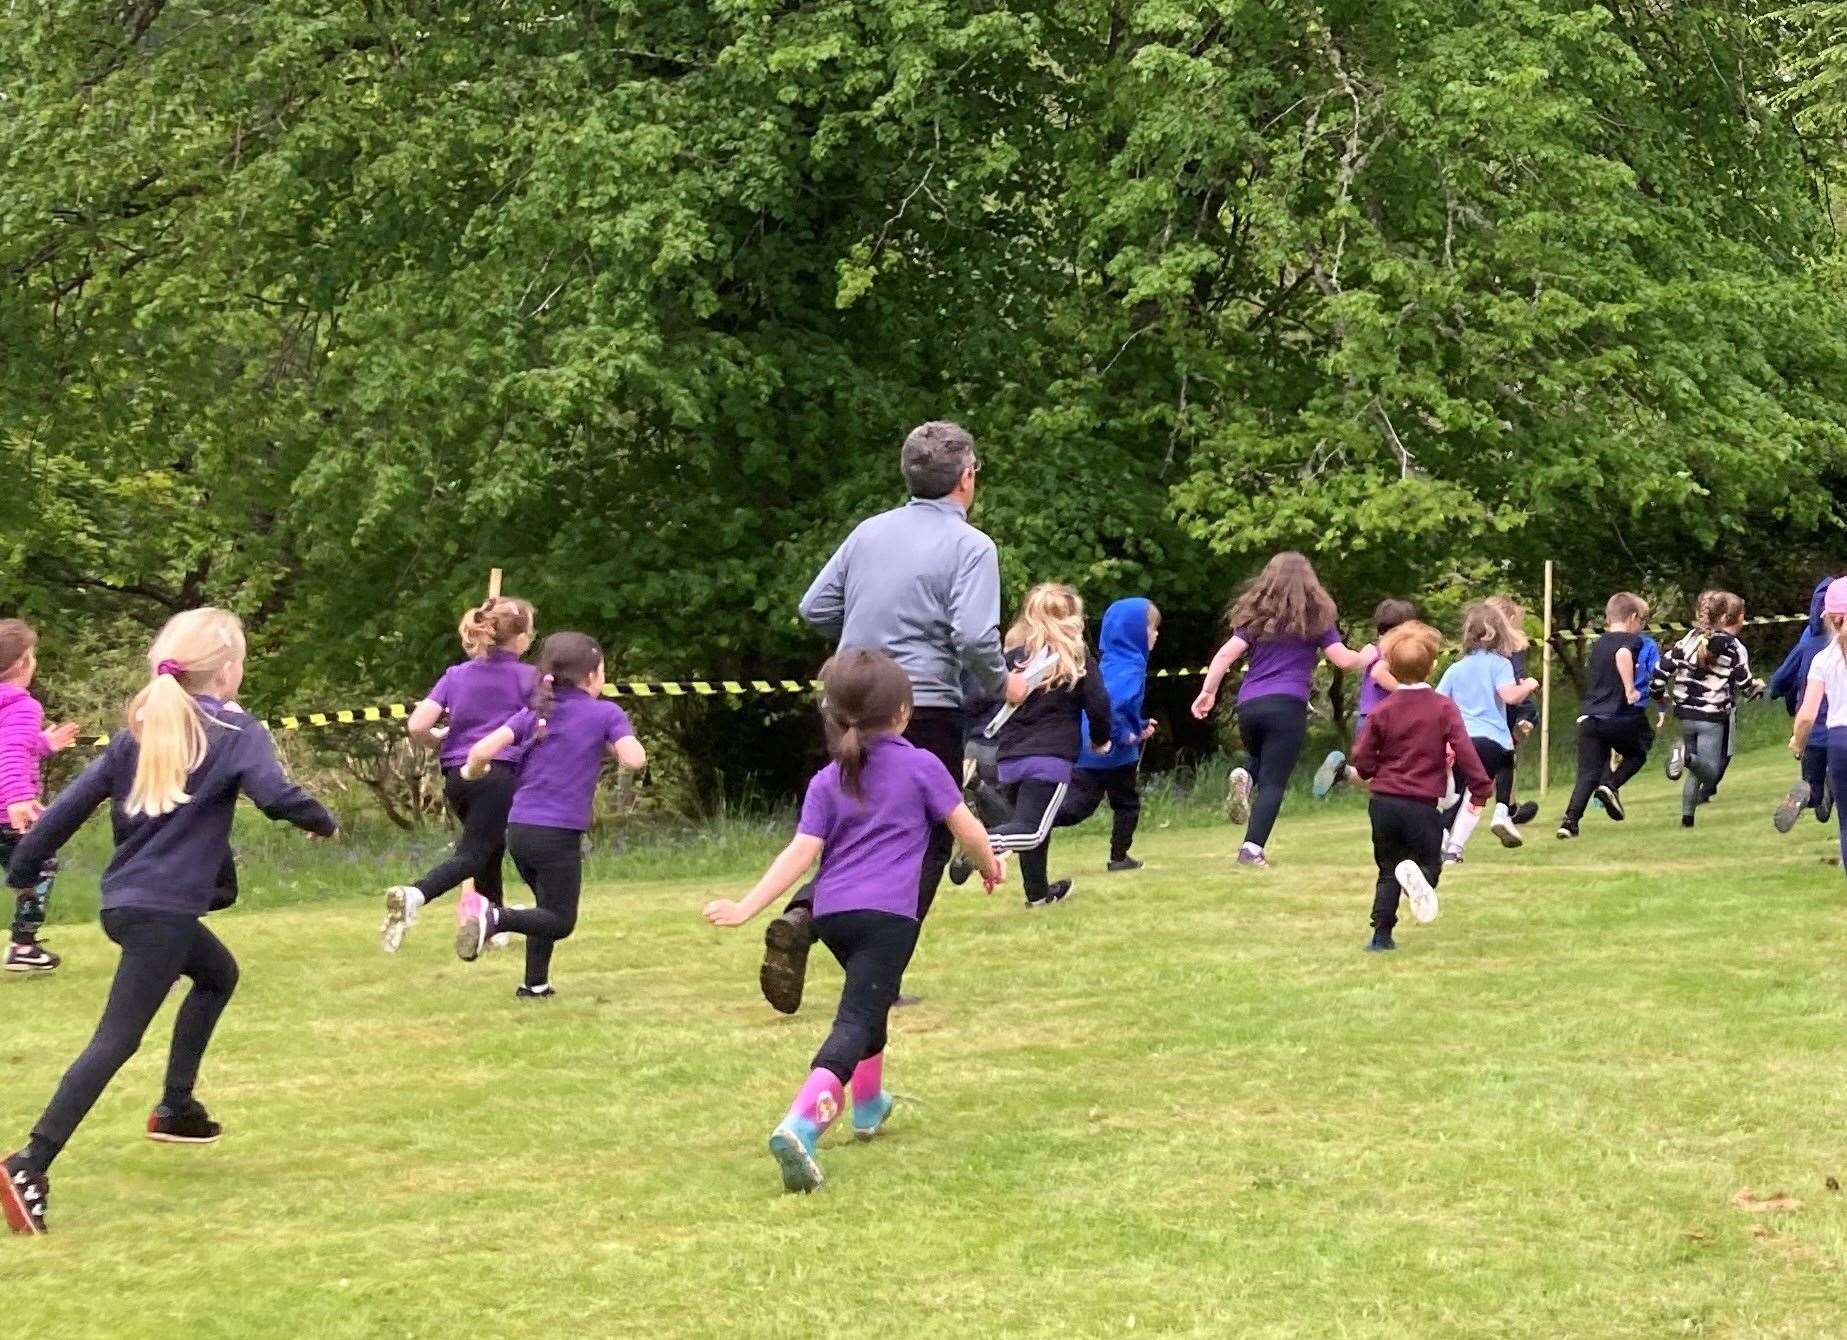 Energy abounded at the first event of its kind since 2019 as schools flocked to Flowerdale for the cross country event.